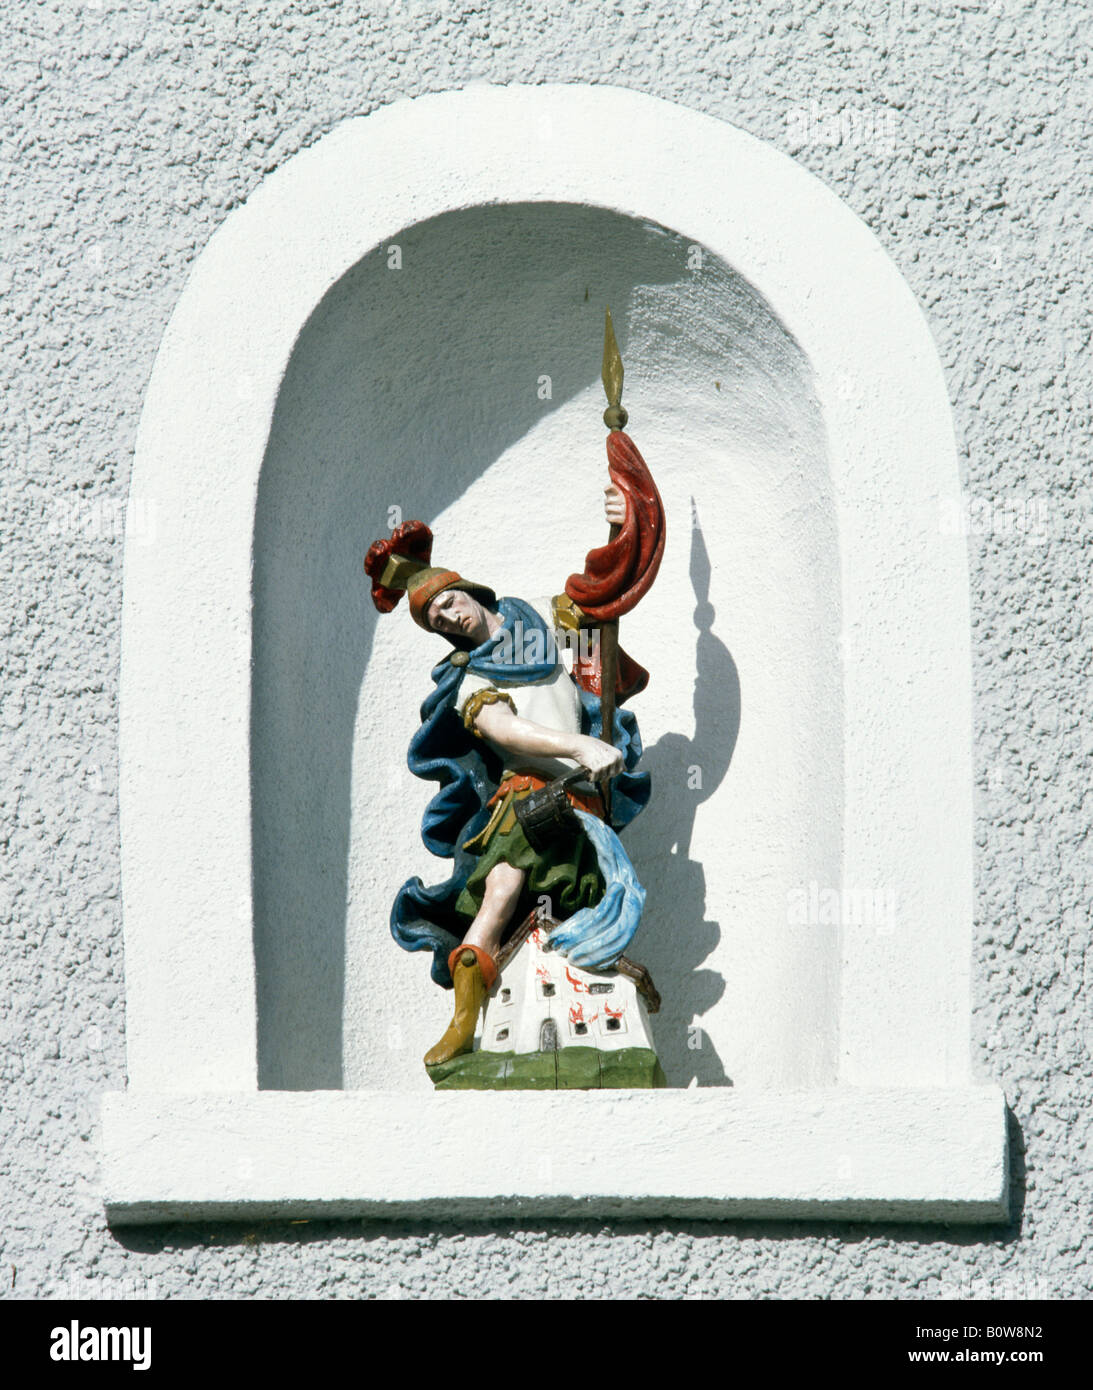 Statue of St. Florian, wall alcove of the fire brigade building, Gelting, Geretsried district, Upper Bavaria, Germany, Europe Stock Photo